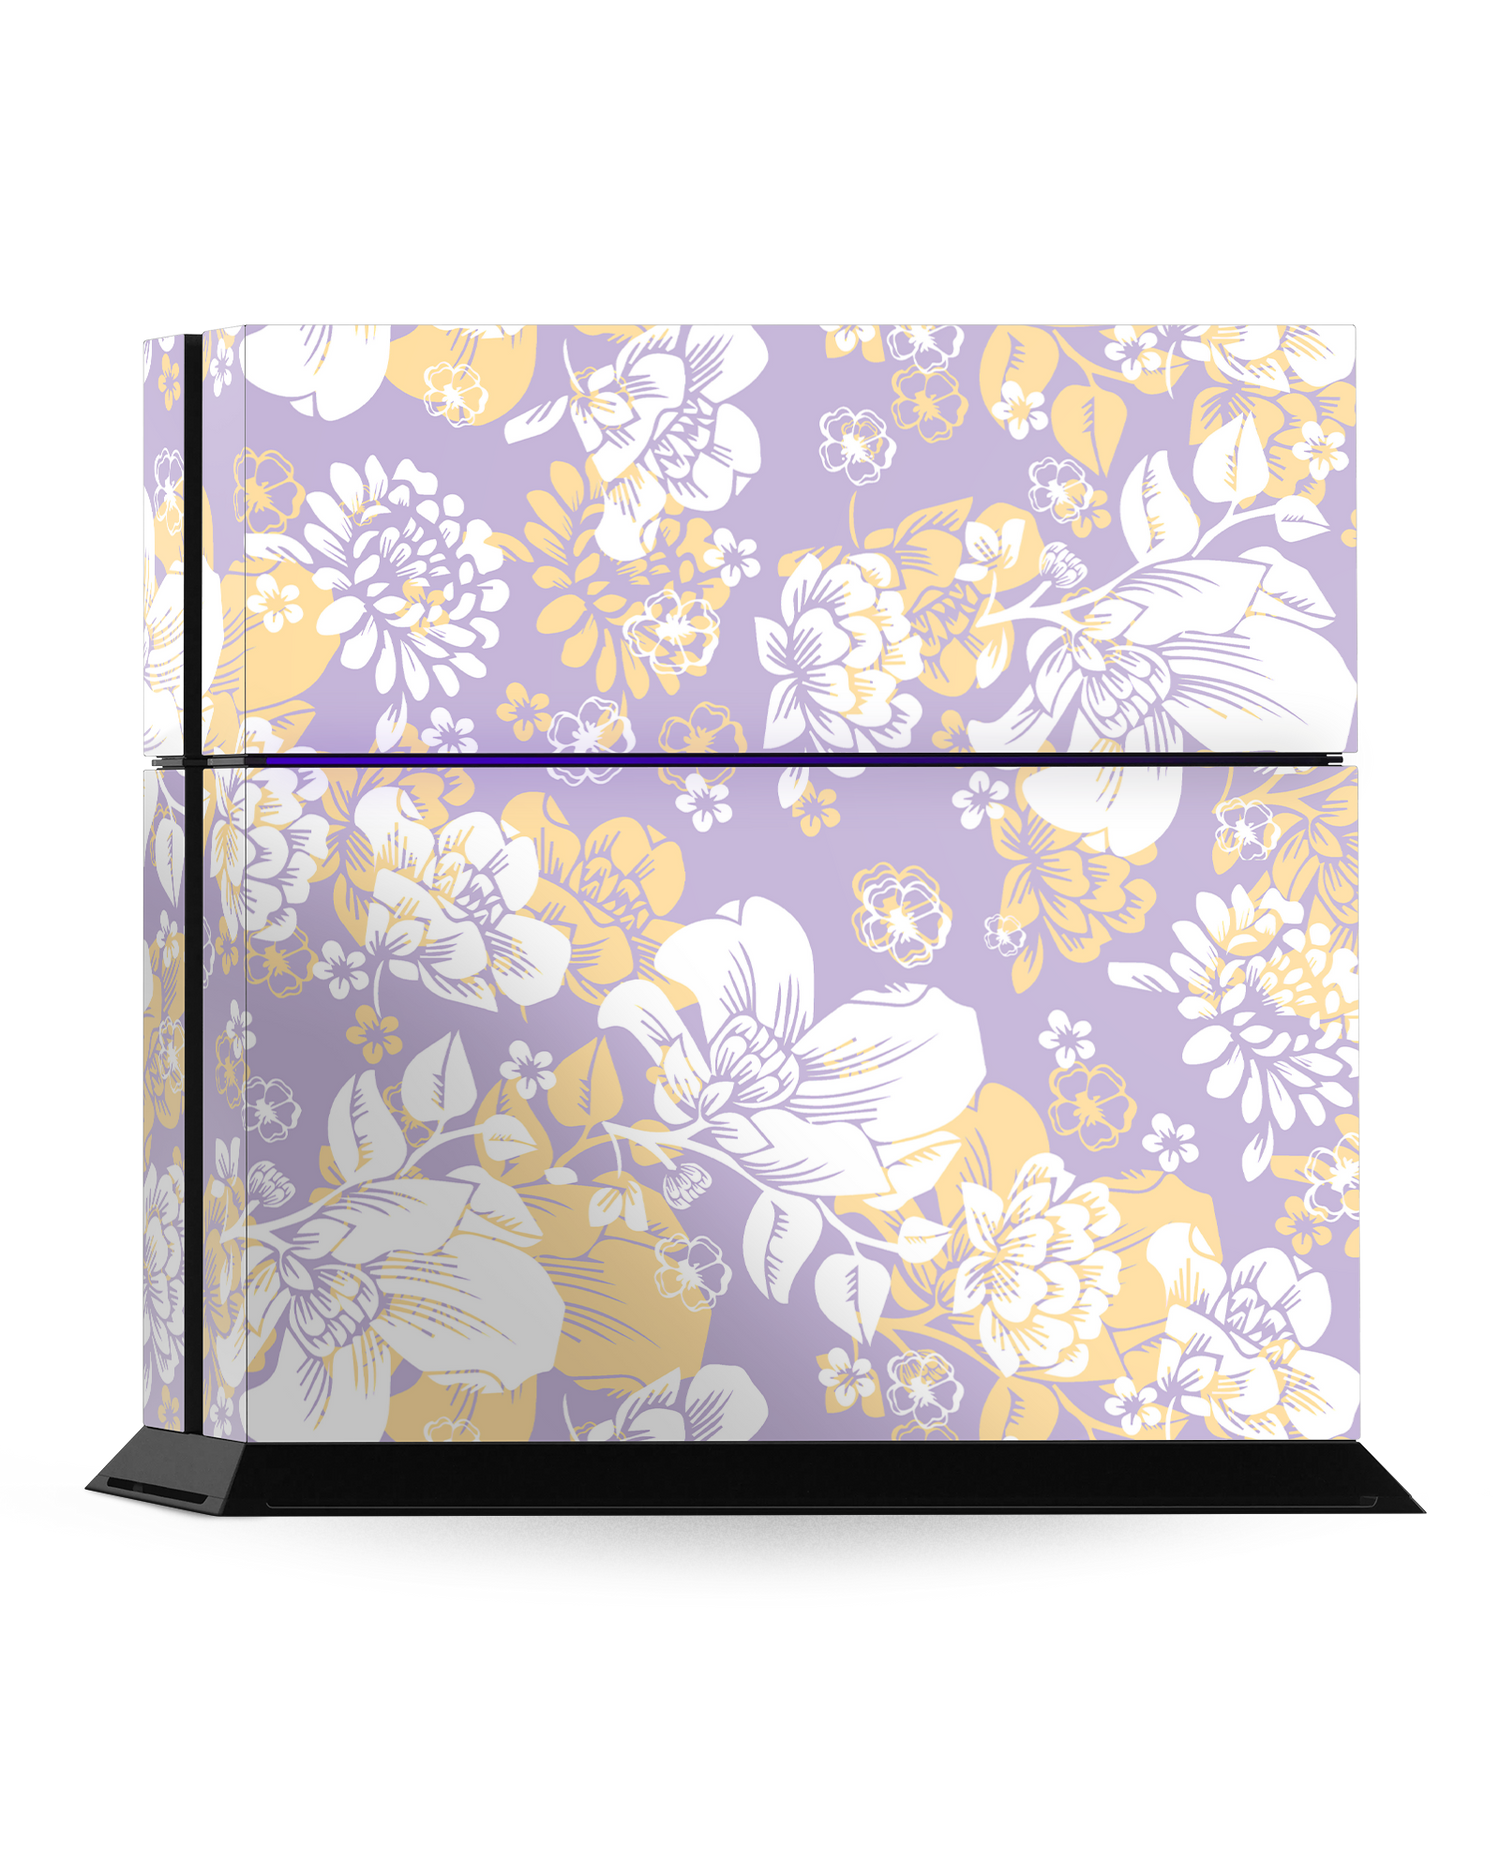 Lavender Floral Console Skin for Sony PlayStation 4: Standing